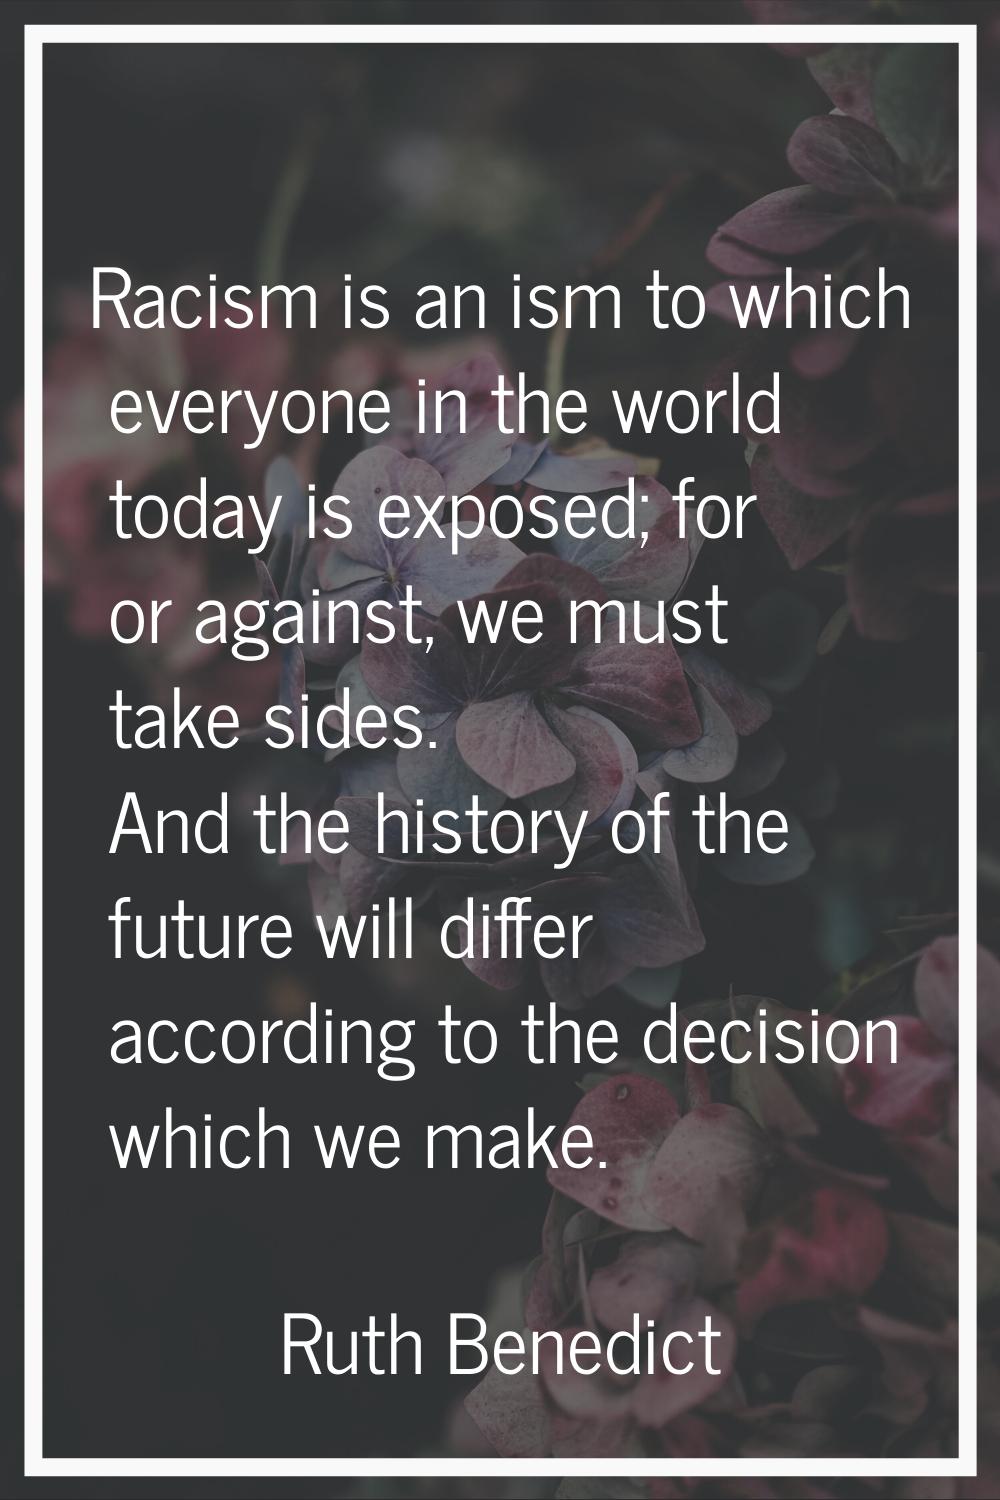 Racism is an ism to which everyone in the world today is exposed; for or against, we must take side